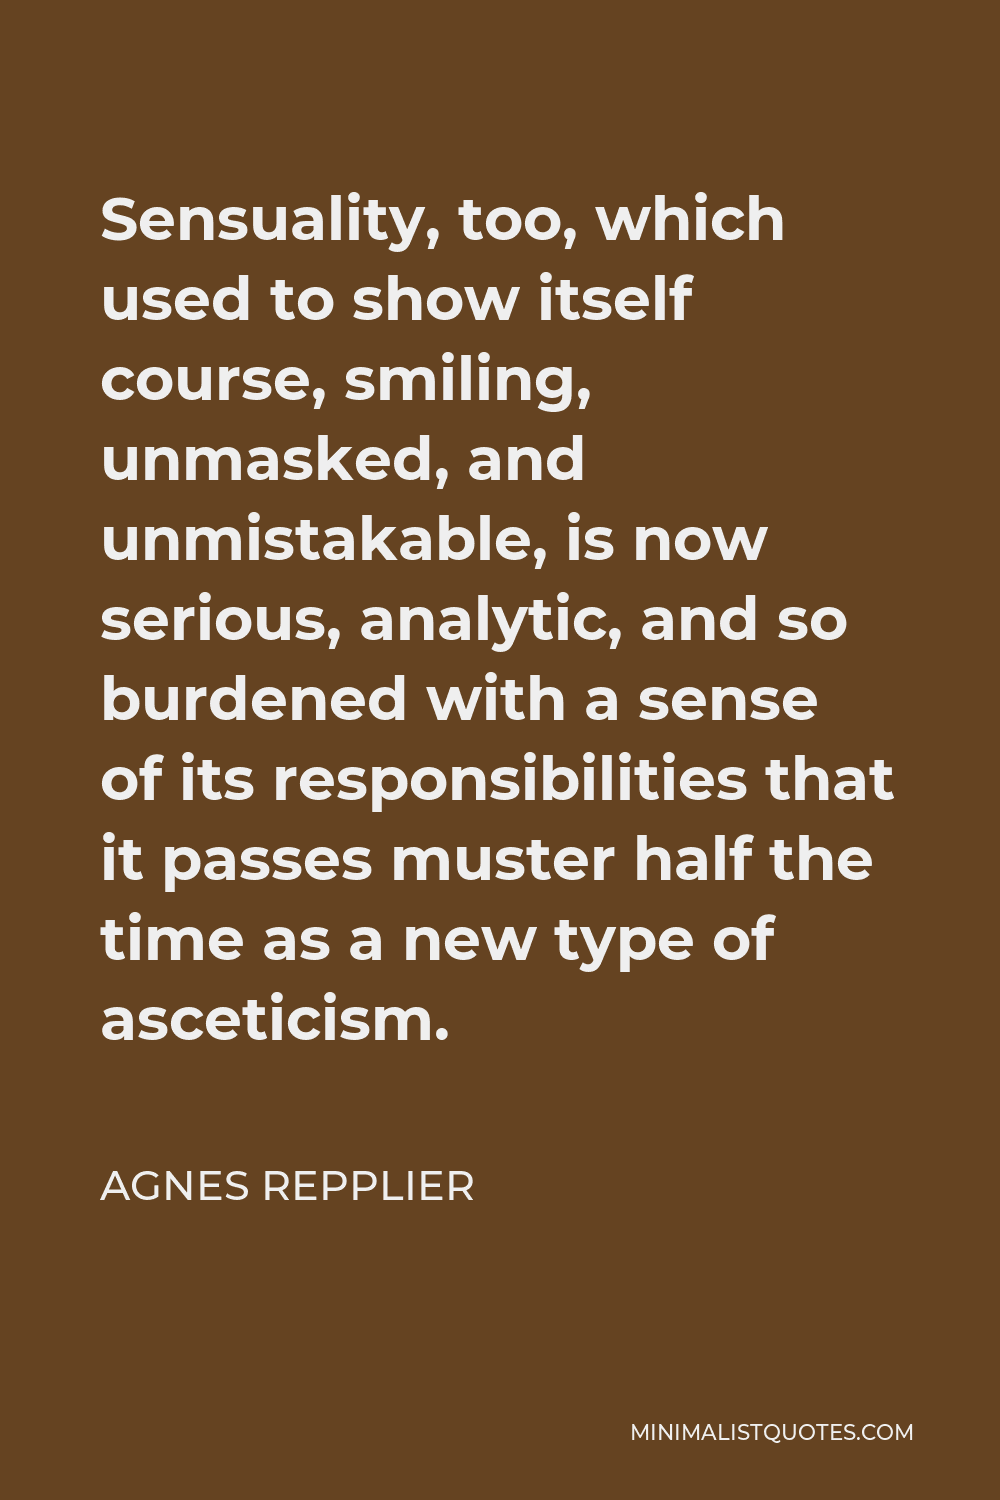 Agnes Repplier Quote - Sensuality, too, which used to show itself course, smiling, unmasked, and unmistakable, is now serious, analytic, and so burdened with a sense of its responsibilities that it passes muster half the time as a new type of asceticism.